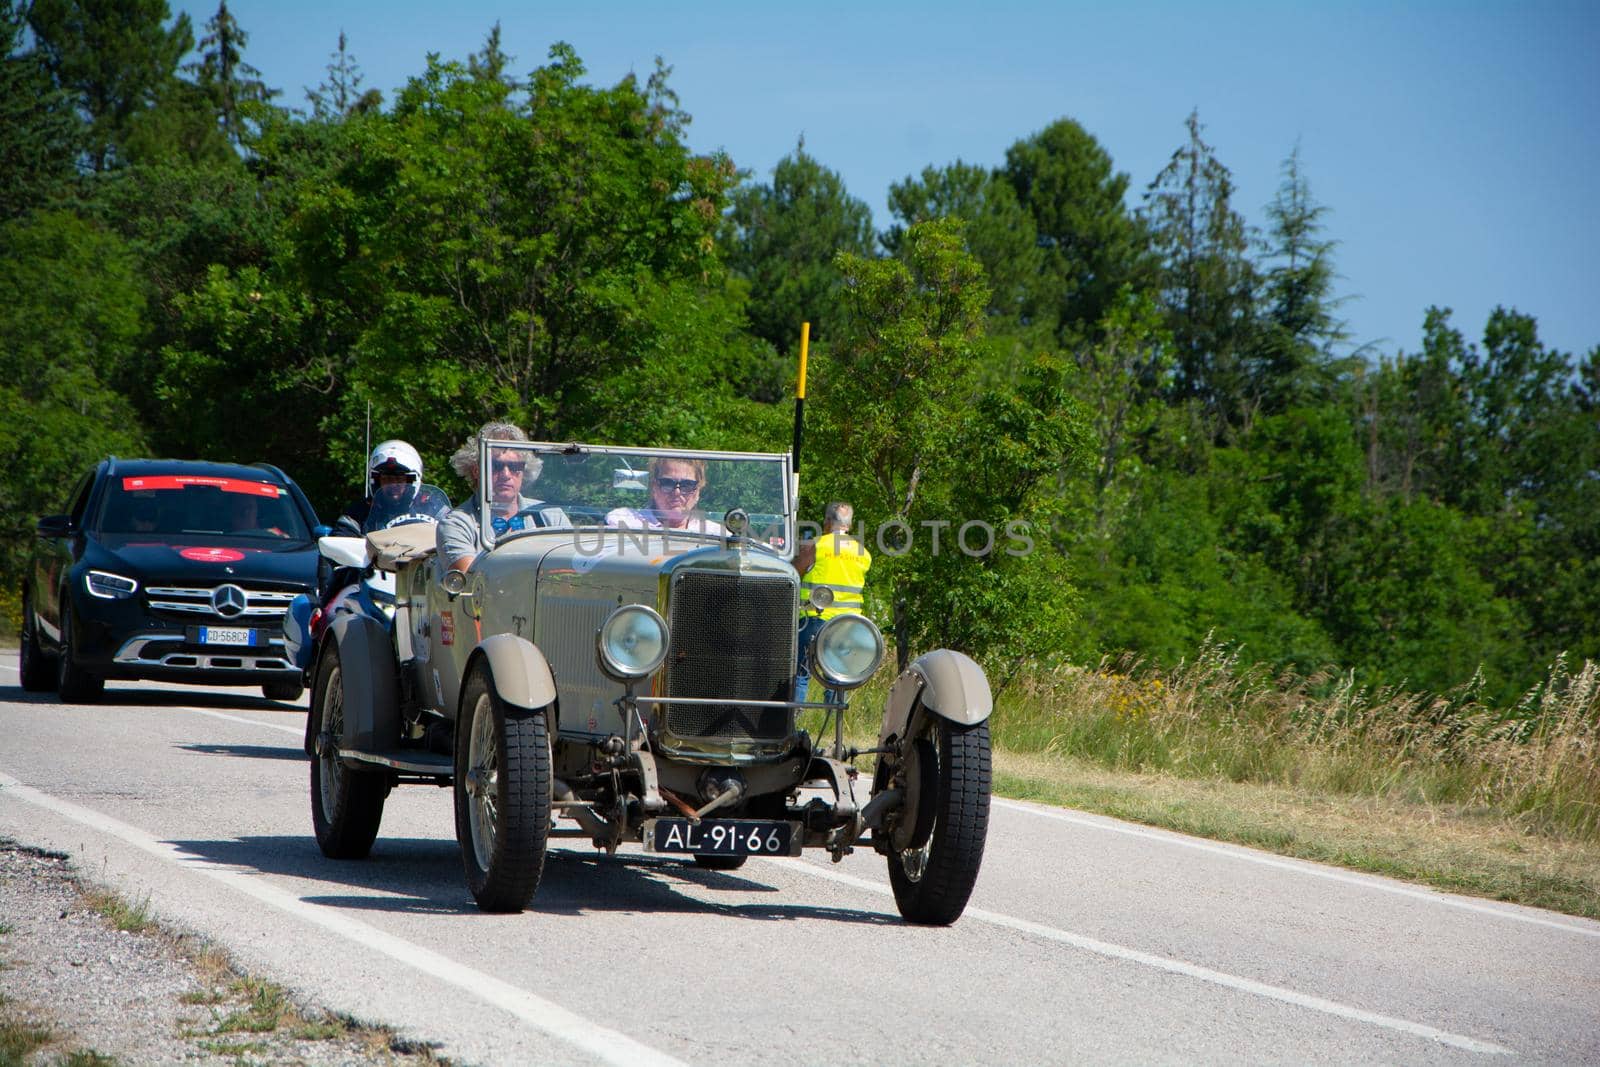 SUNBEAM 3 LITRE TWIN CAM SUPER SPORT 1926 on an old racing car in rally Mille Miglia 2022 the famous italian historical race (1927-1957 by massimocampanari